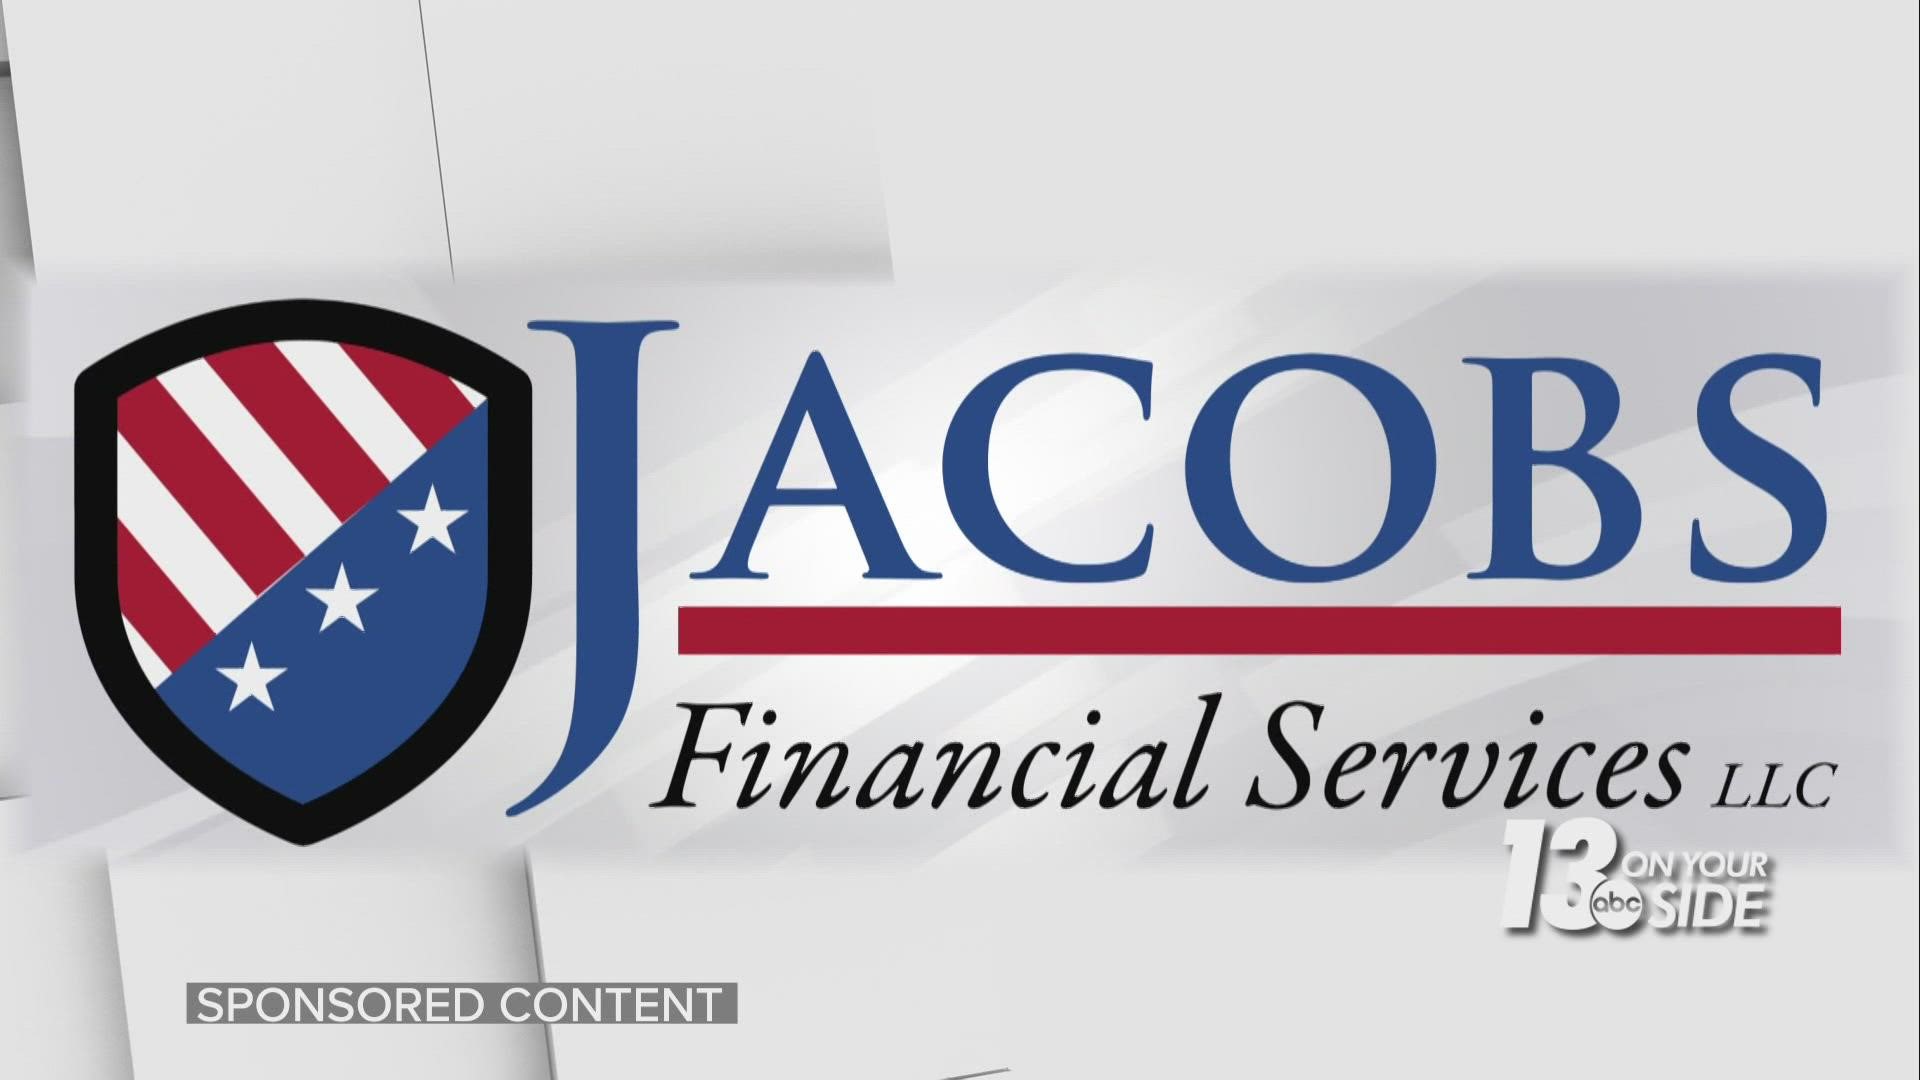 Whatever your vision for retirement, let Tom Jacobs with Jacobs Financial Services help you get there.